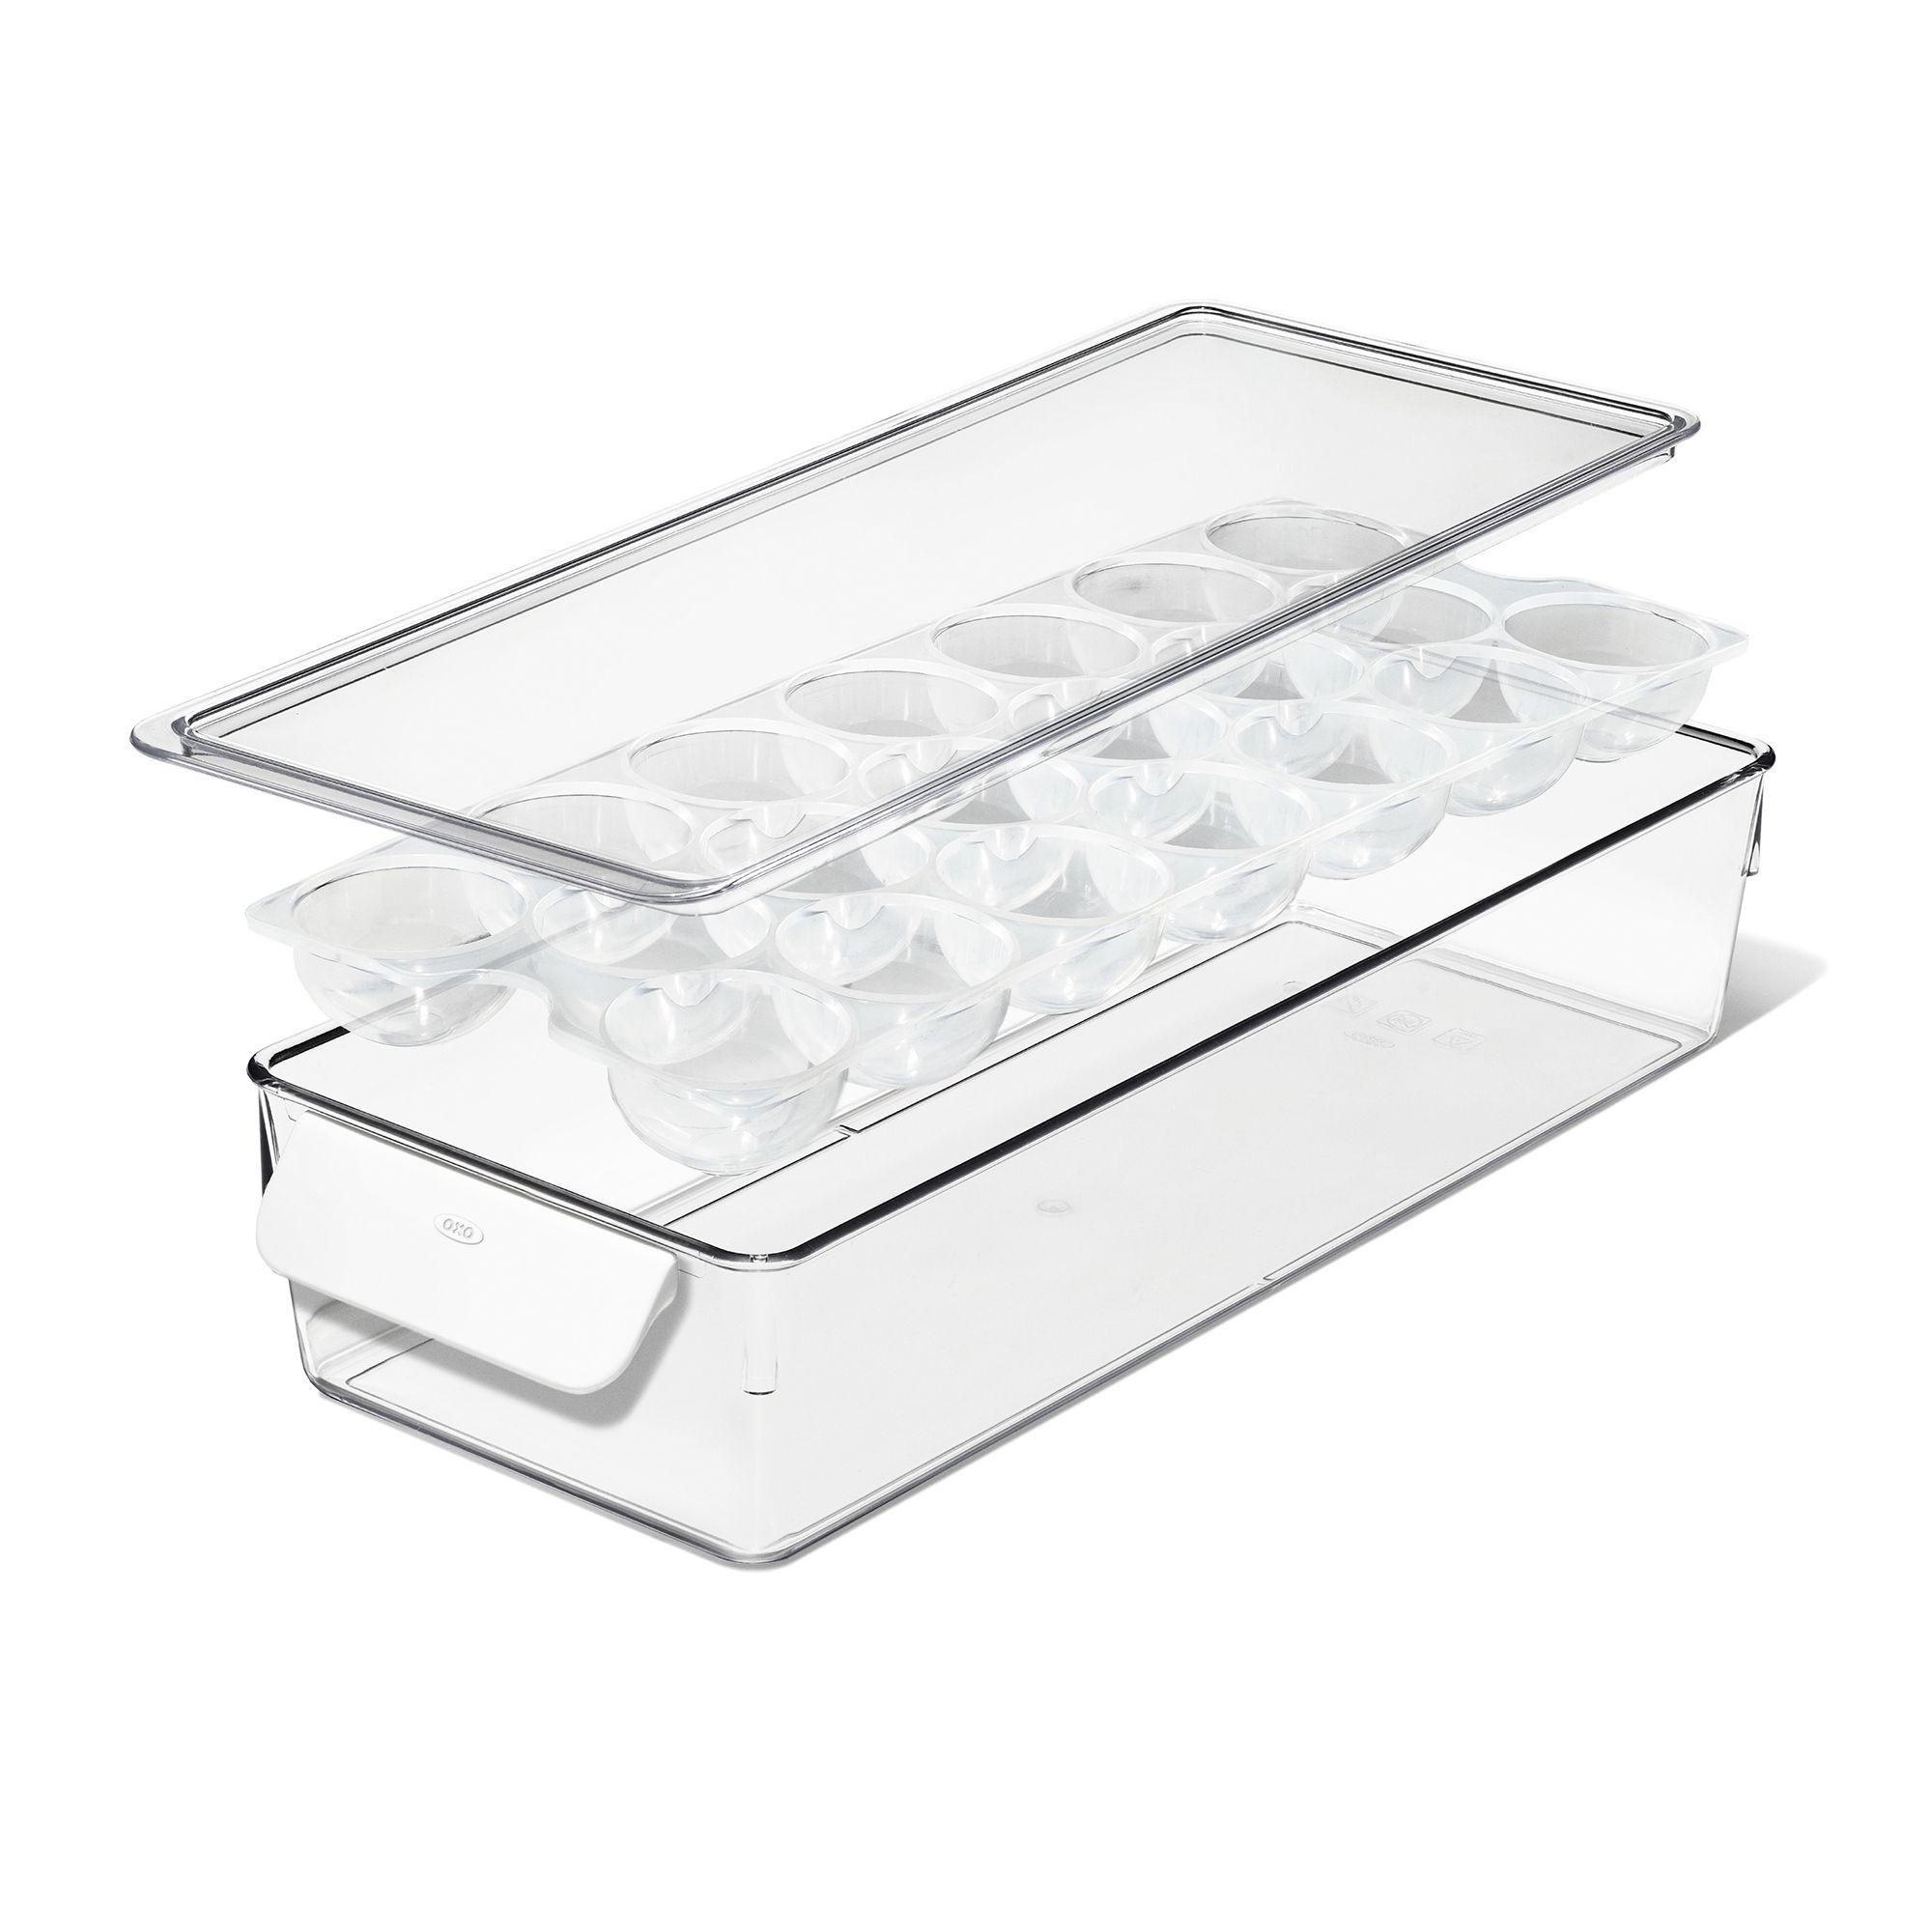 OXO Good Grips Fridge Egg Bin with Removable Tray Clear Image 5